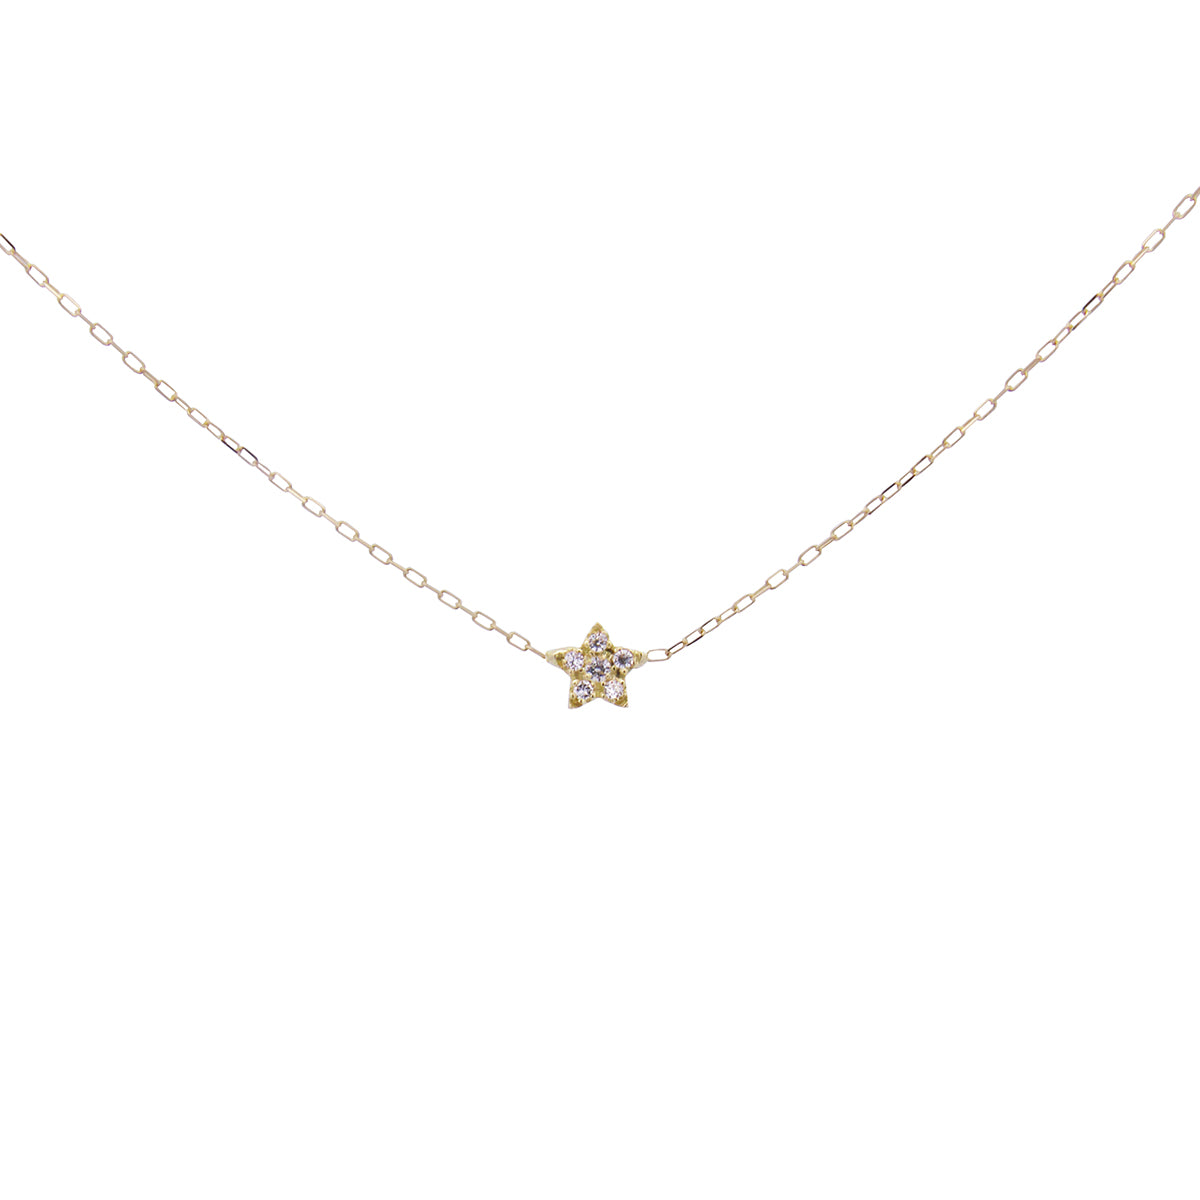 Chokers - Star Choker and Lab Grown Diamonds - ORO18KT - 1 | Rue des Mille